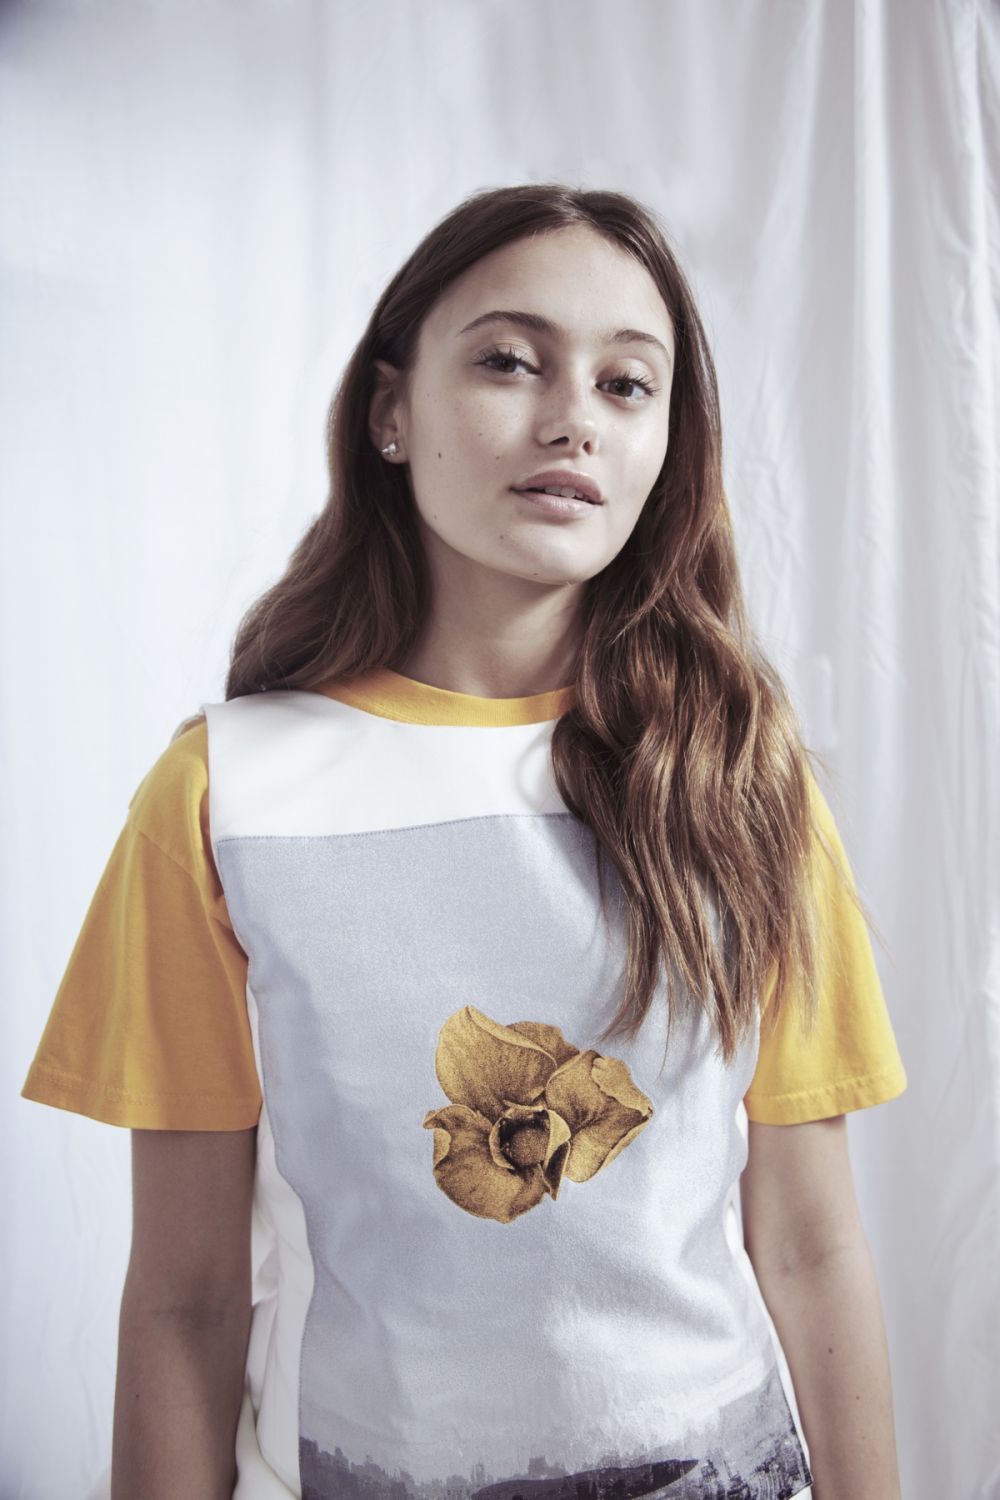 Ella Purnell Sexy and Hottest Photos , Latest Pics